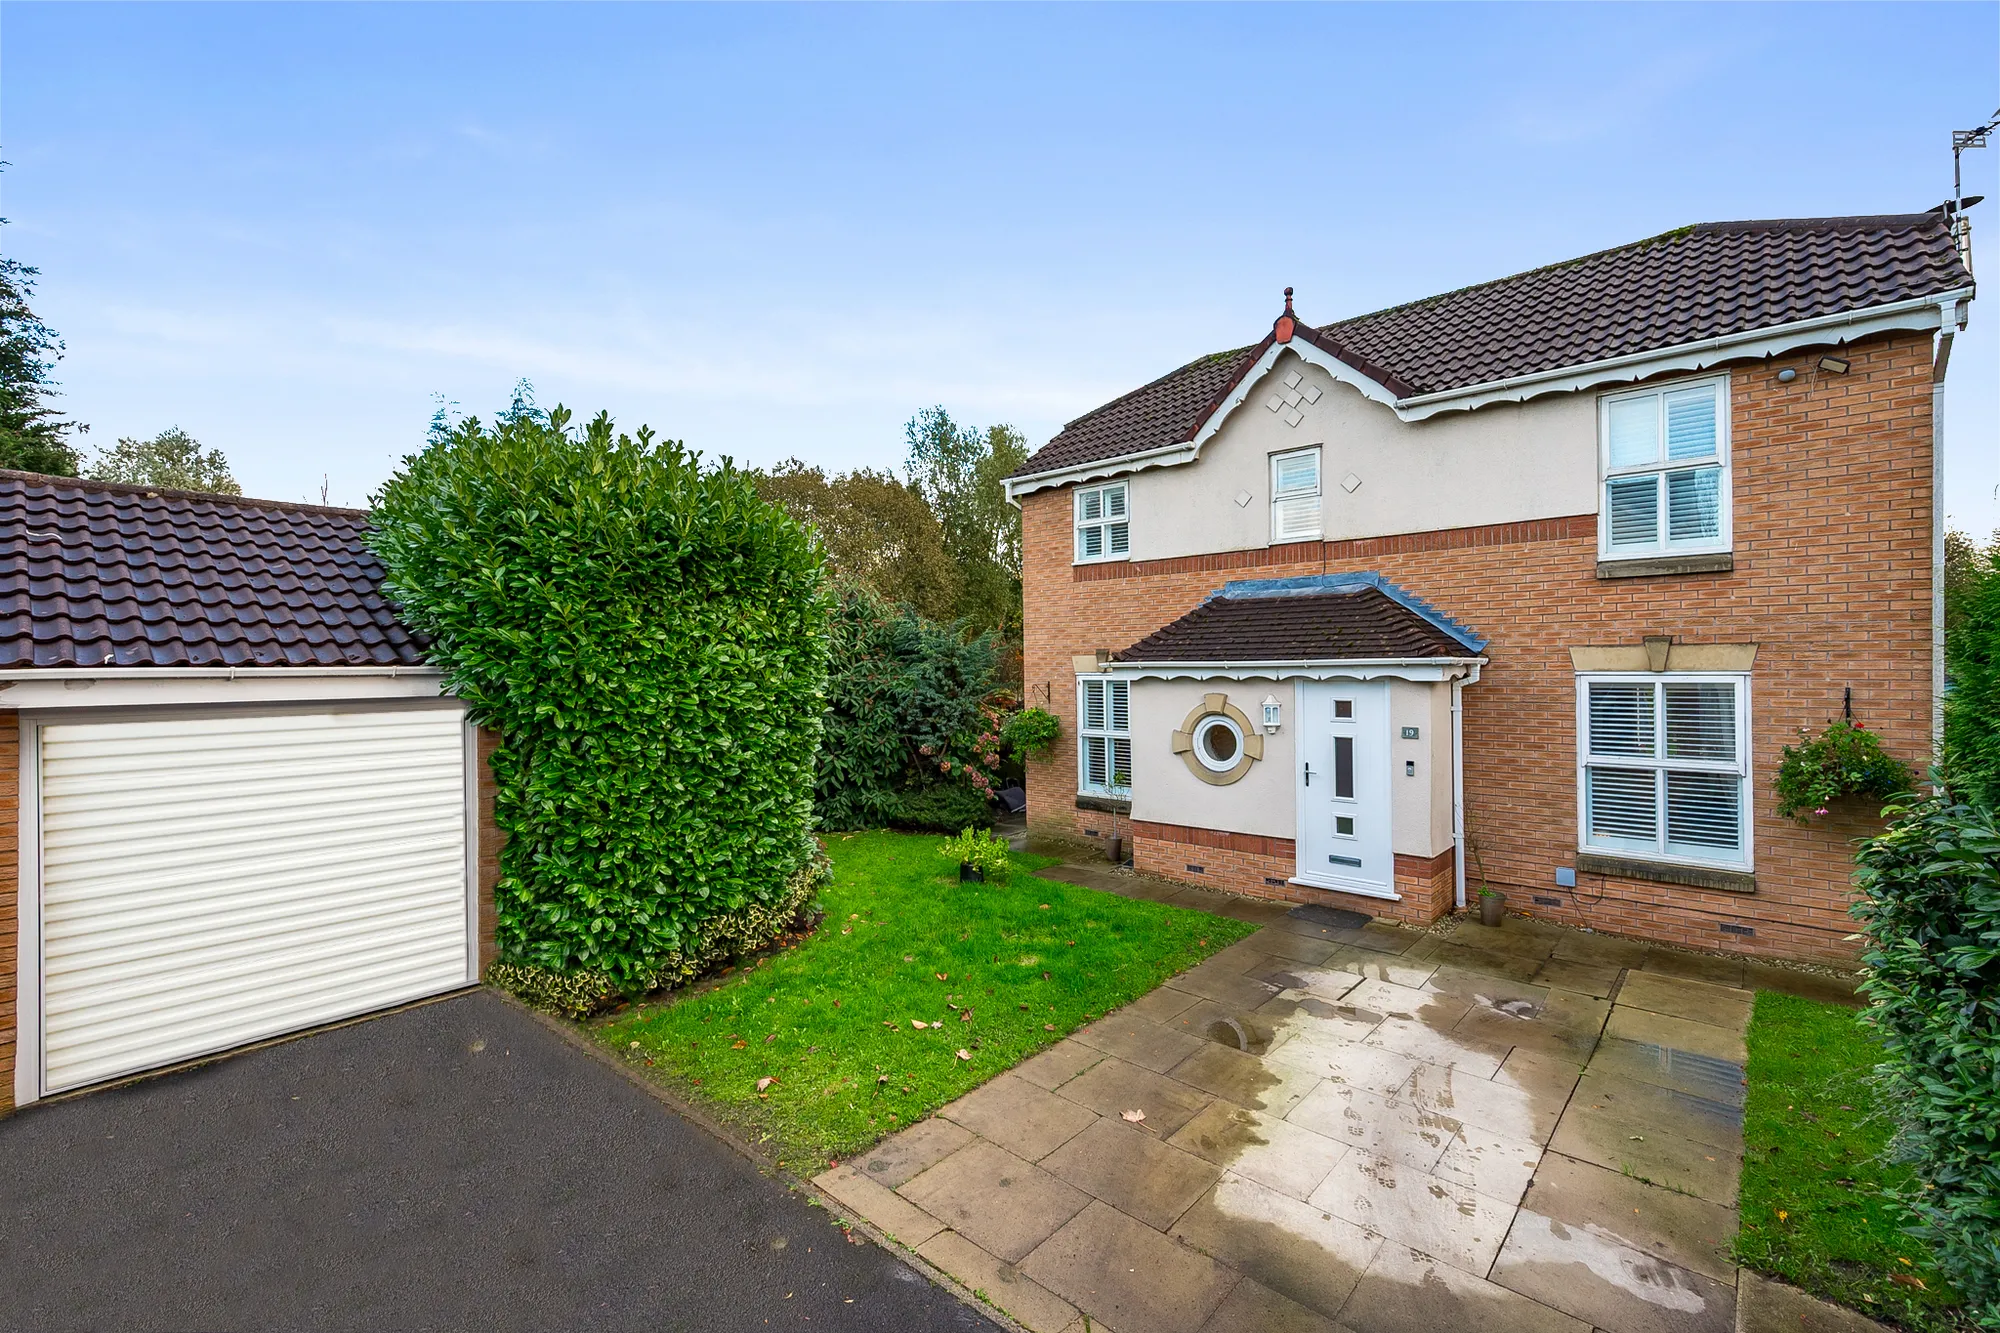 3 bed detached house for sale in Malham Drive, Manchester - Property Image 1